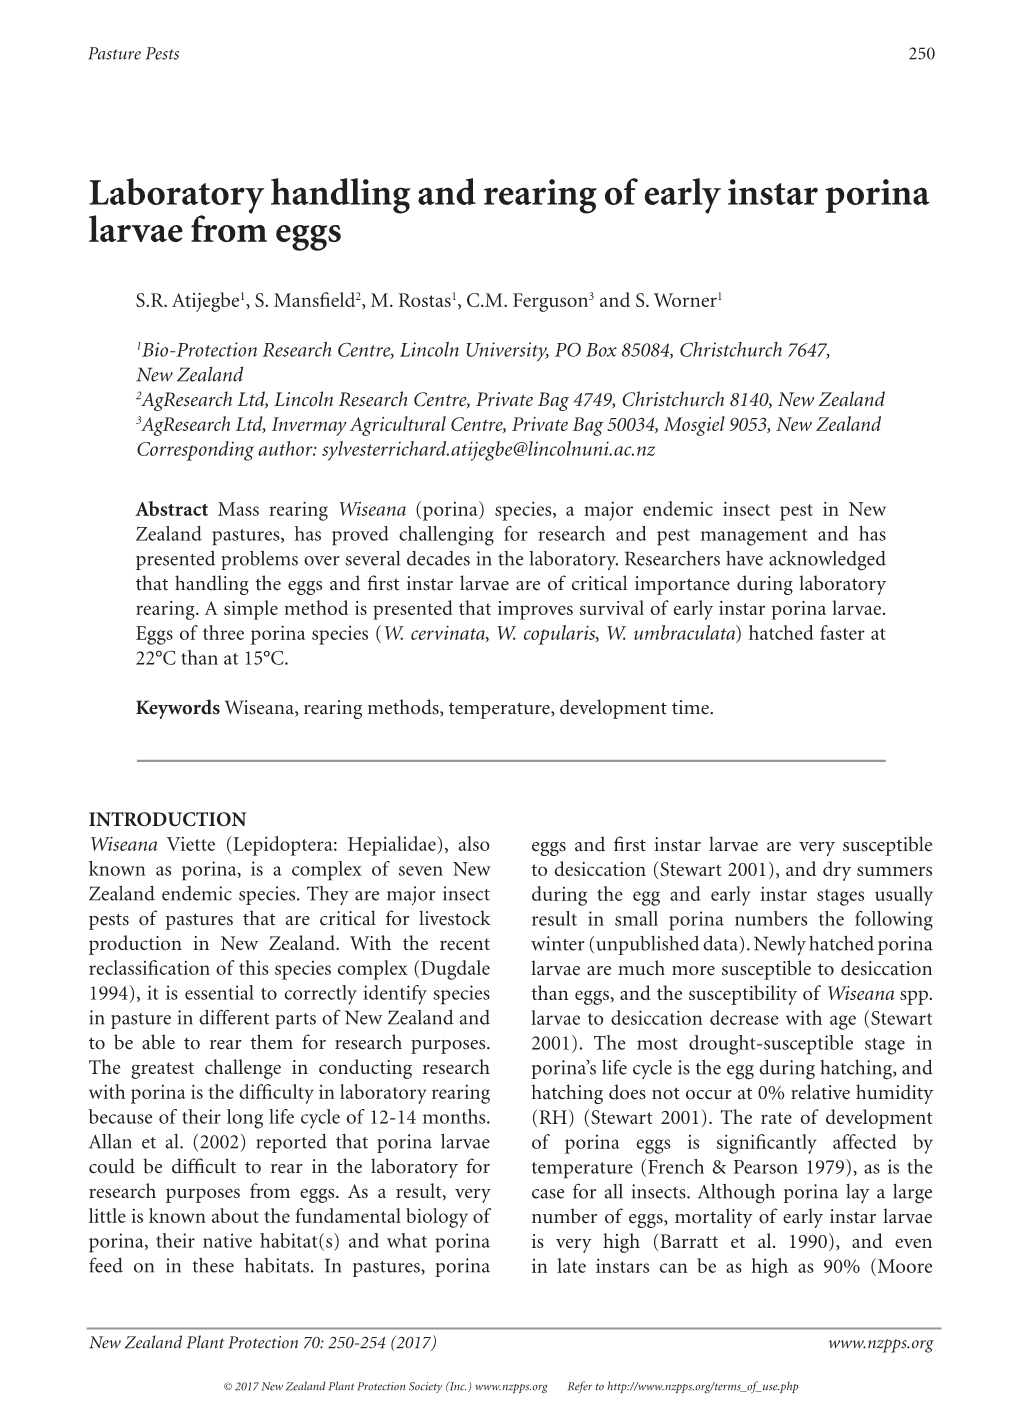 Laboratory Handling and Rearing of Early Instar Porina Larvae from Eggs